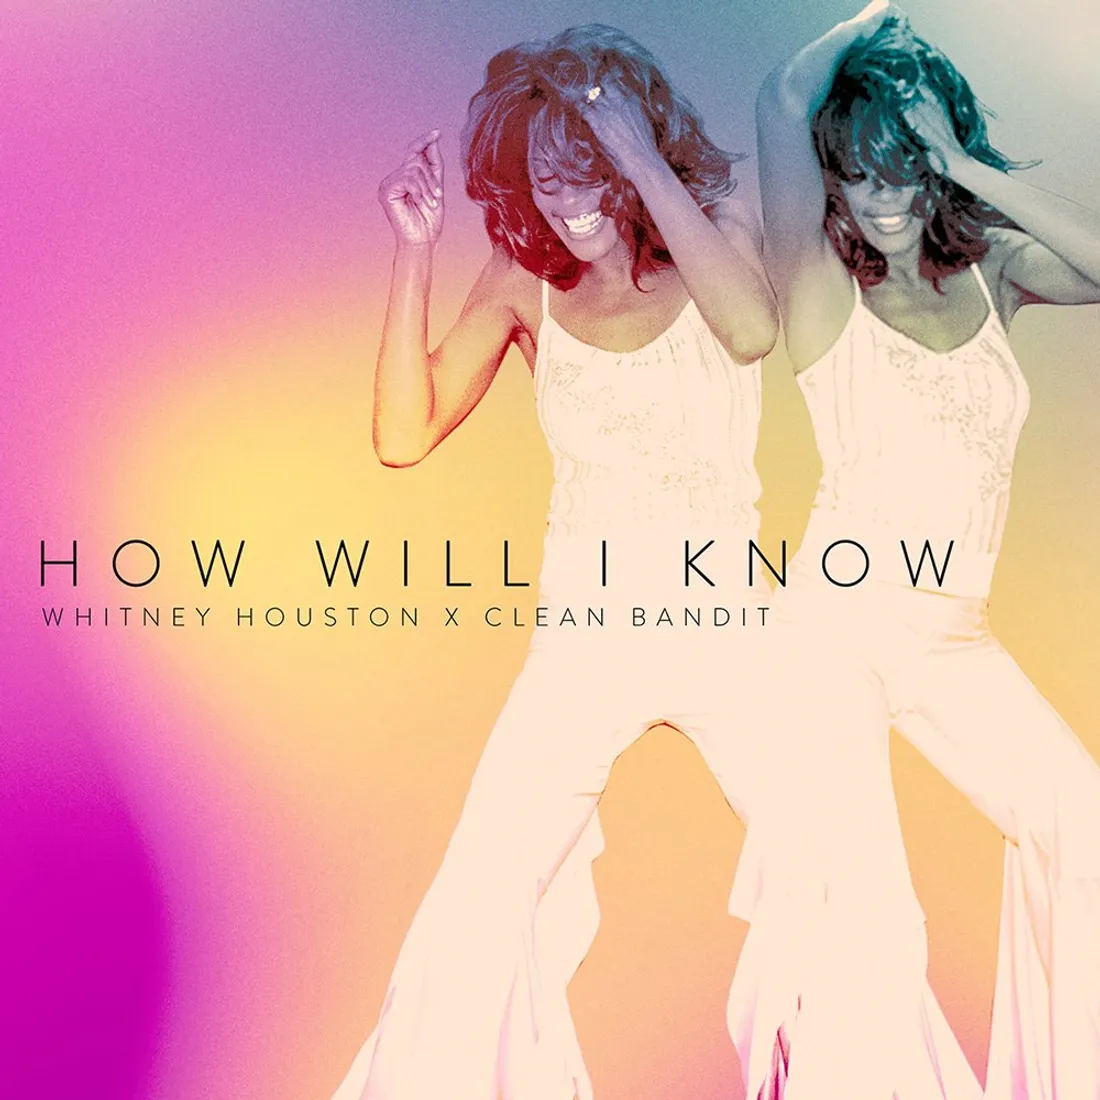 Clean Bandit x Whitney Houston "How Will I Know"